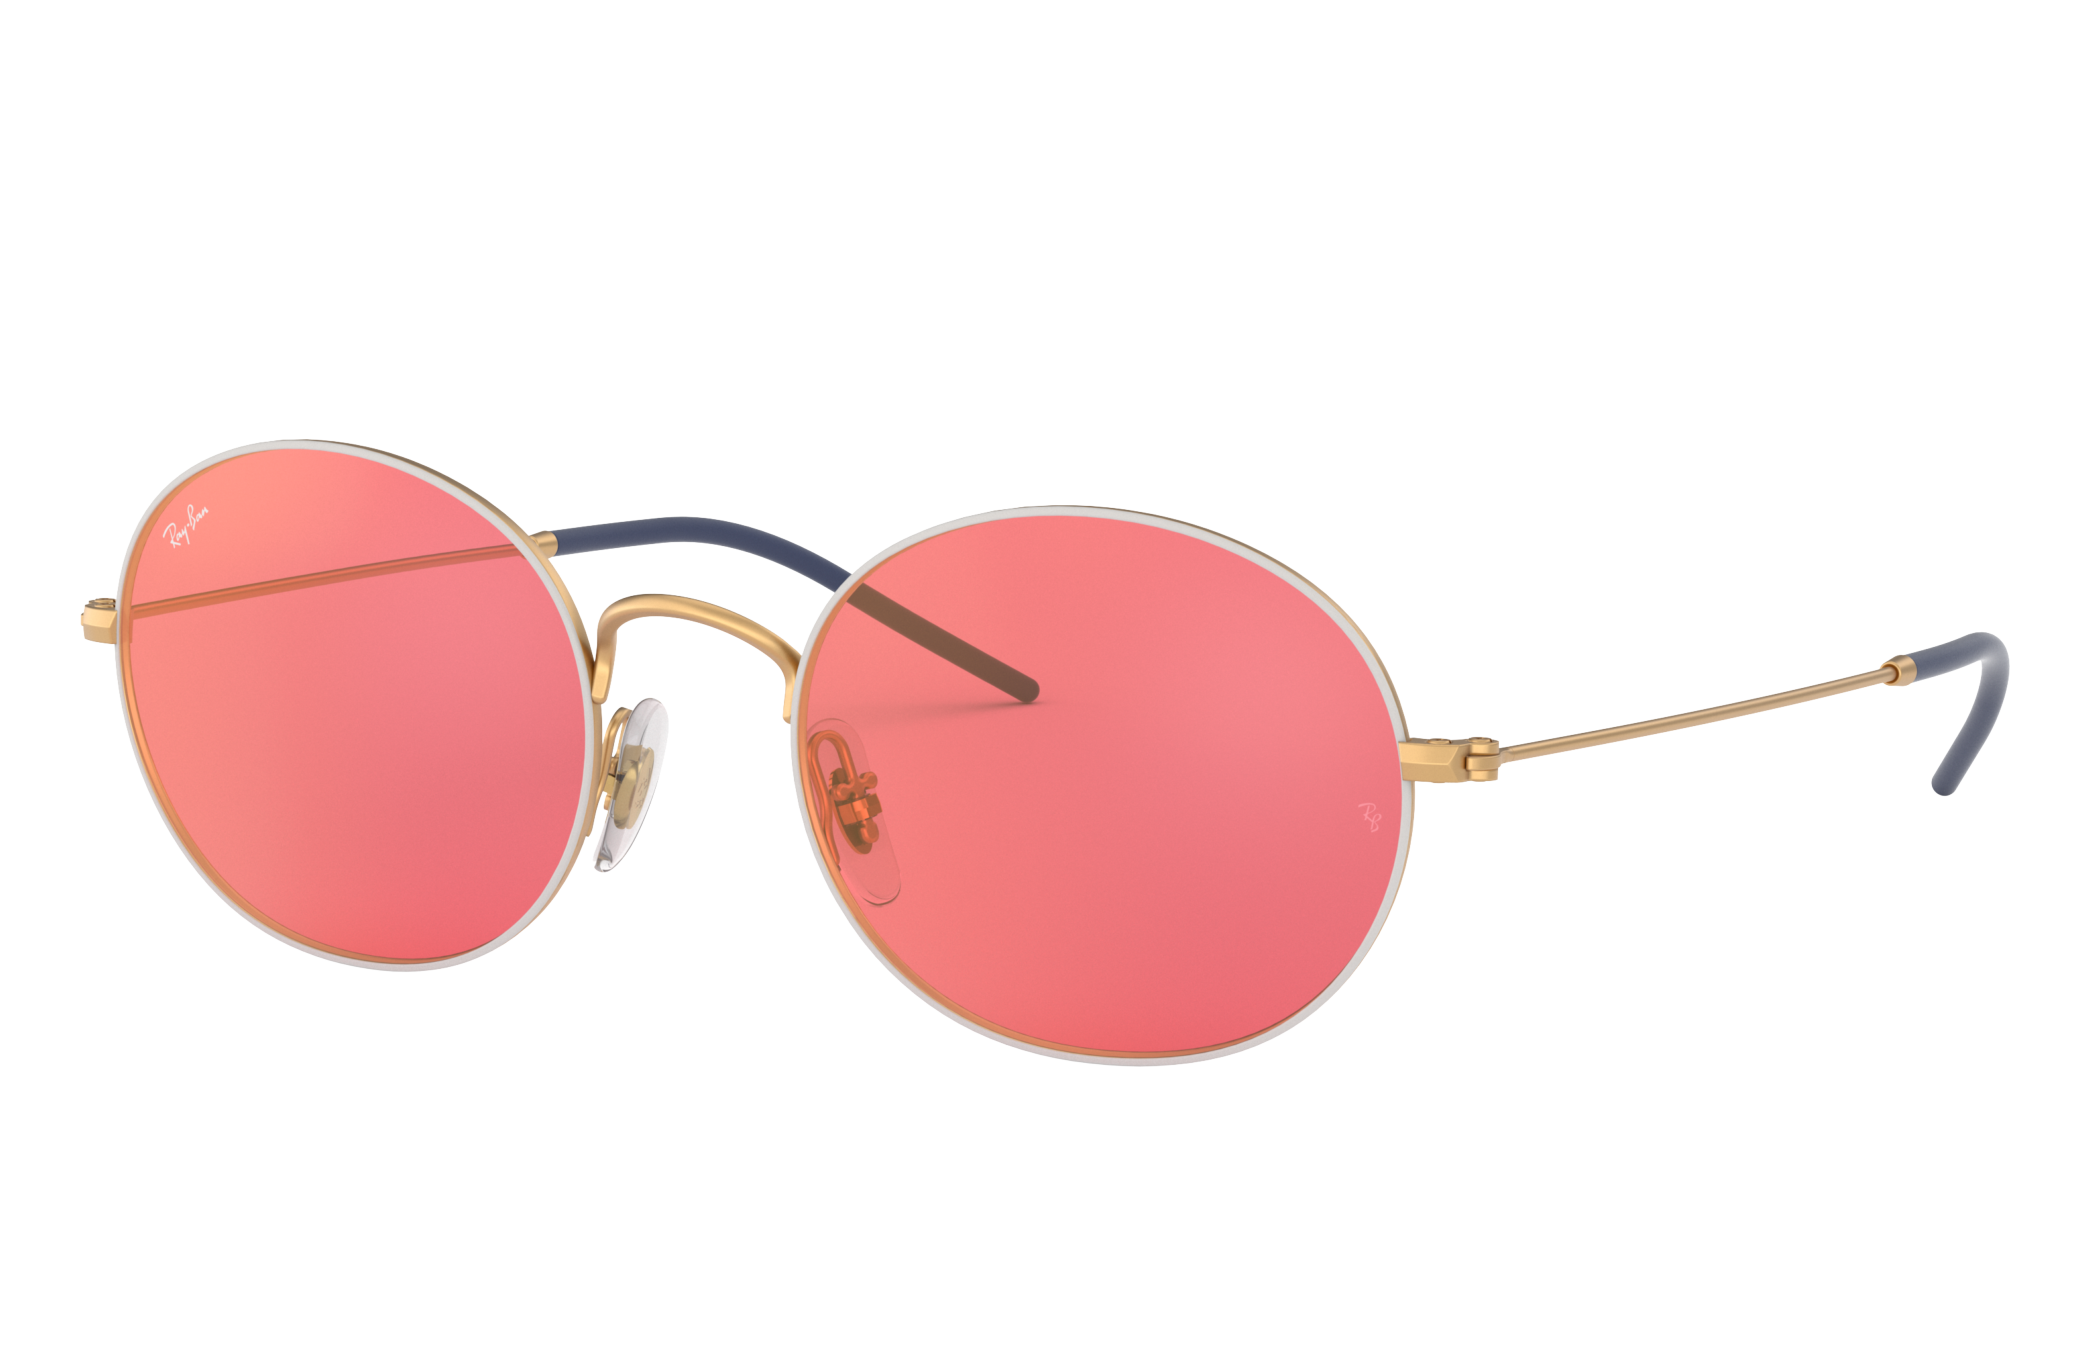 Ray-ban Beat Sunglasses in White and Red | Ray-Ban®